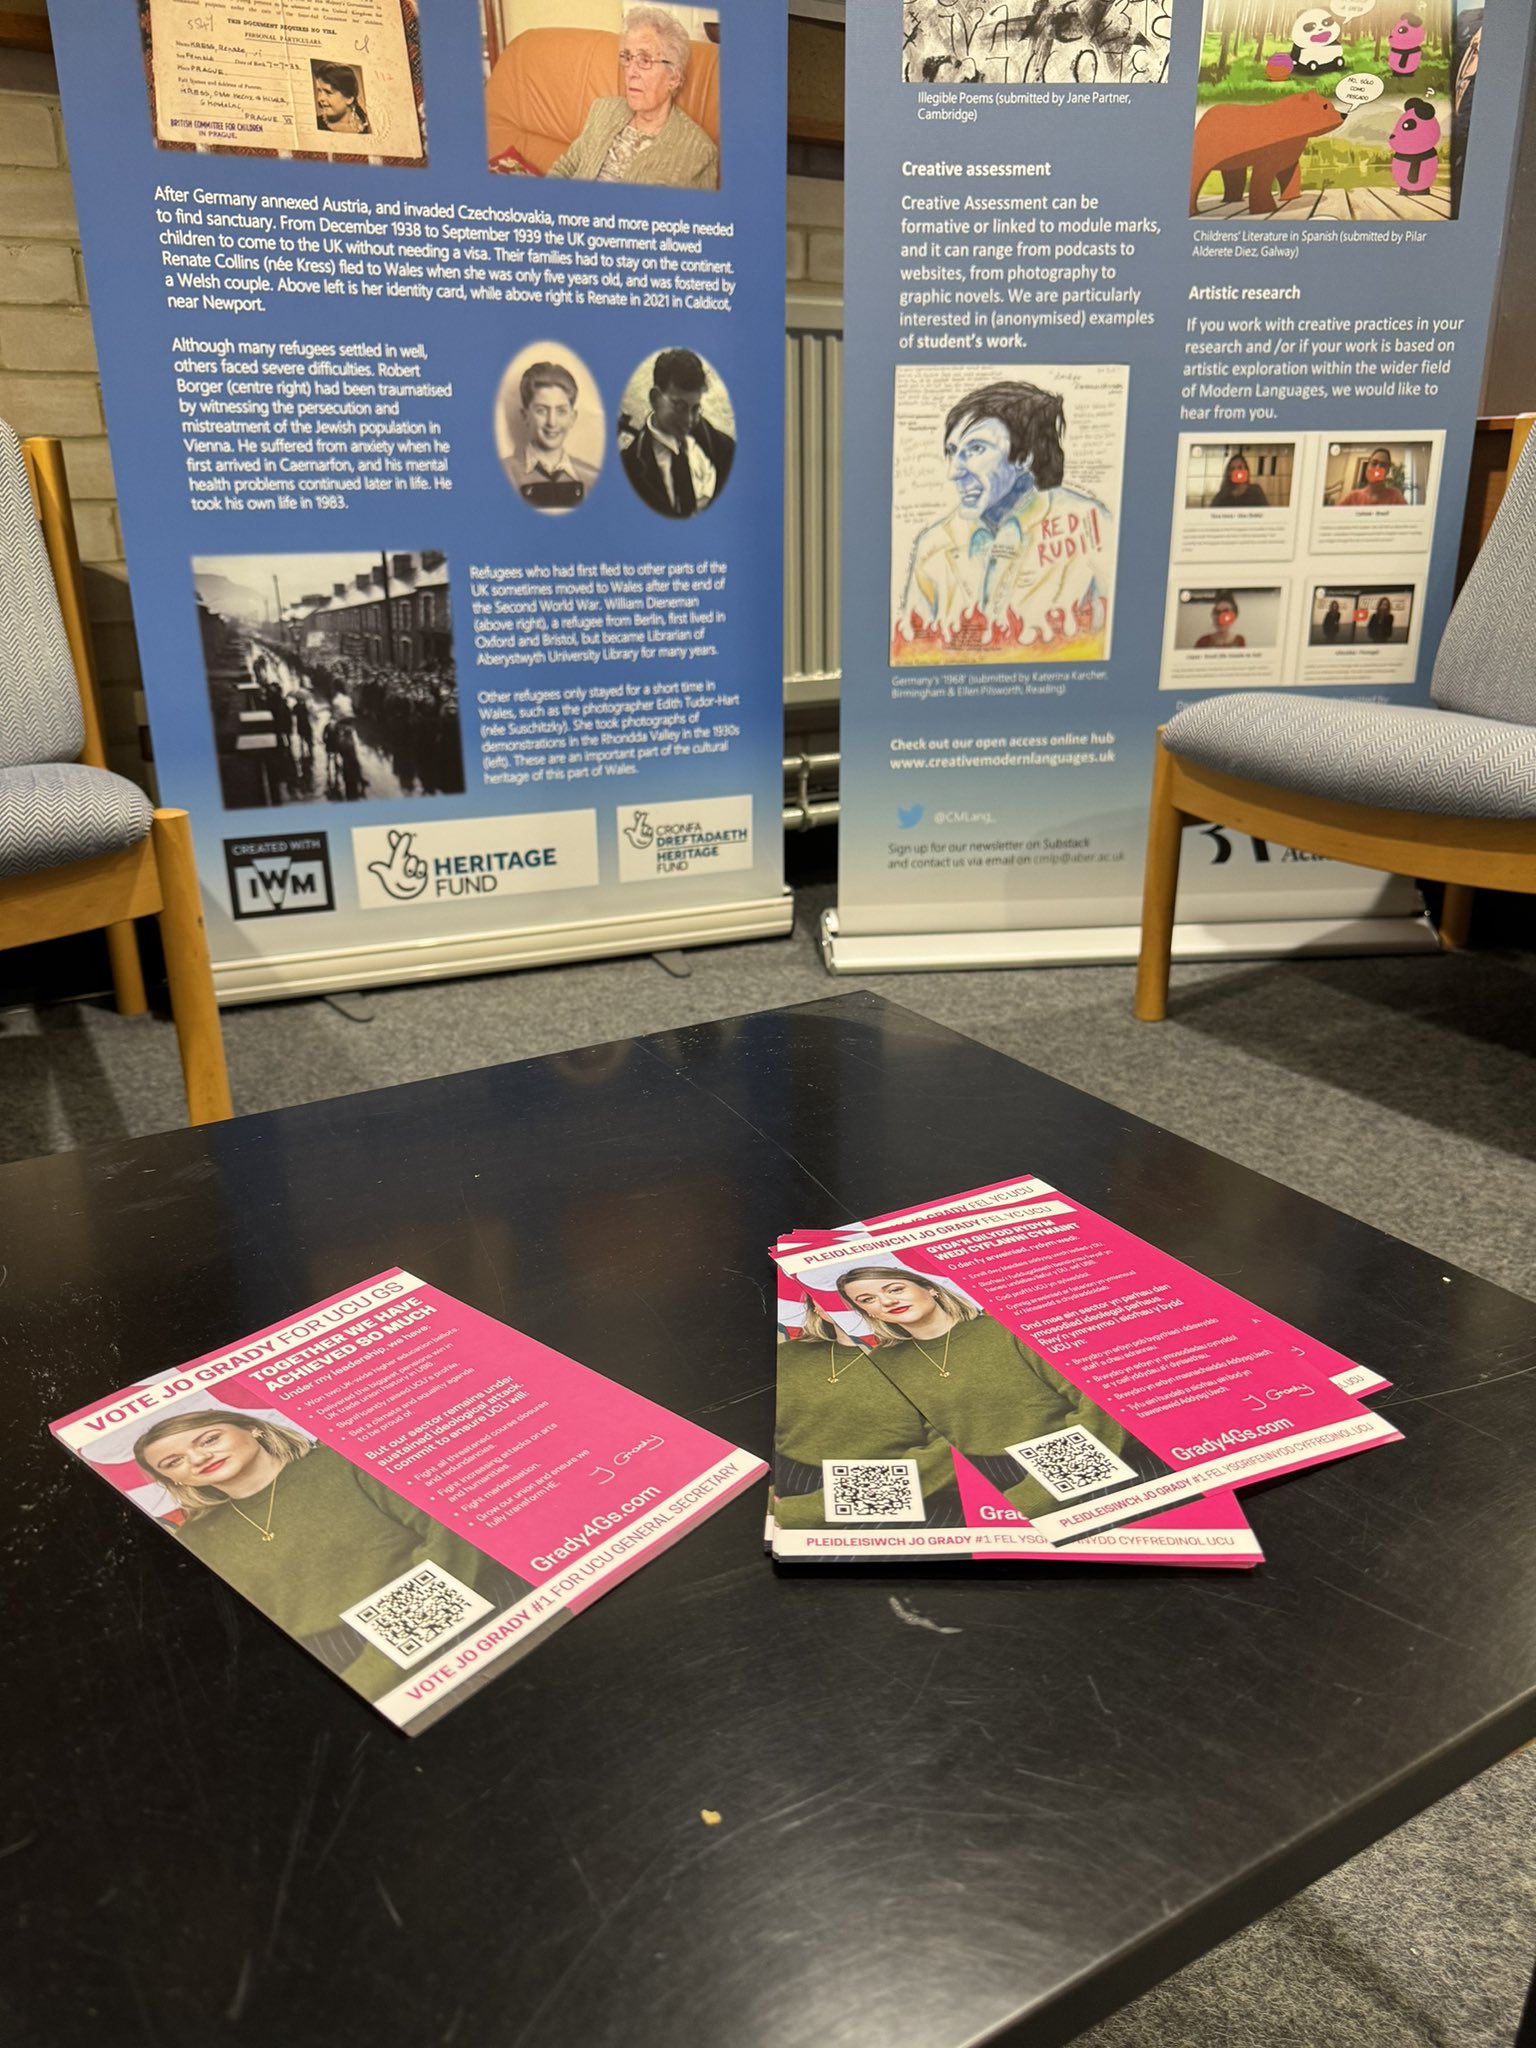 Grady4GS leaflets in English and Welsh on a table.